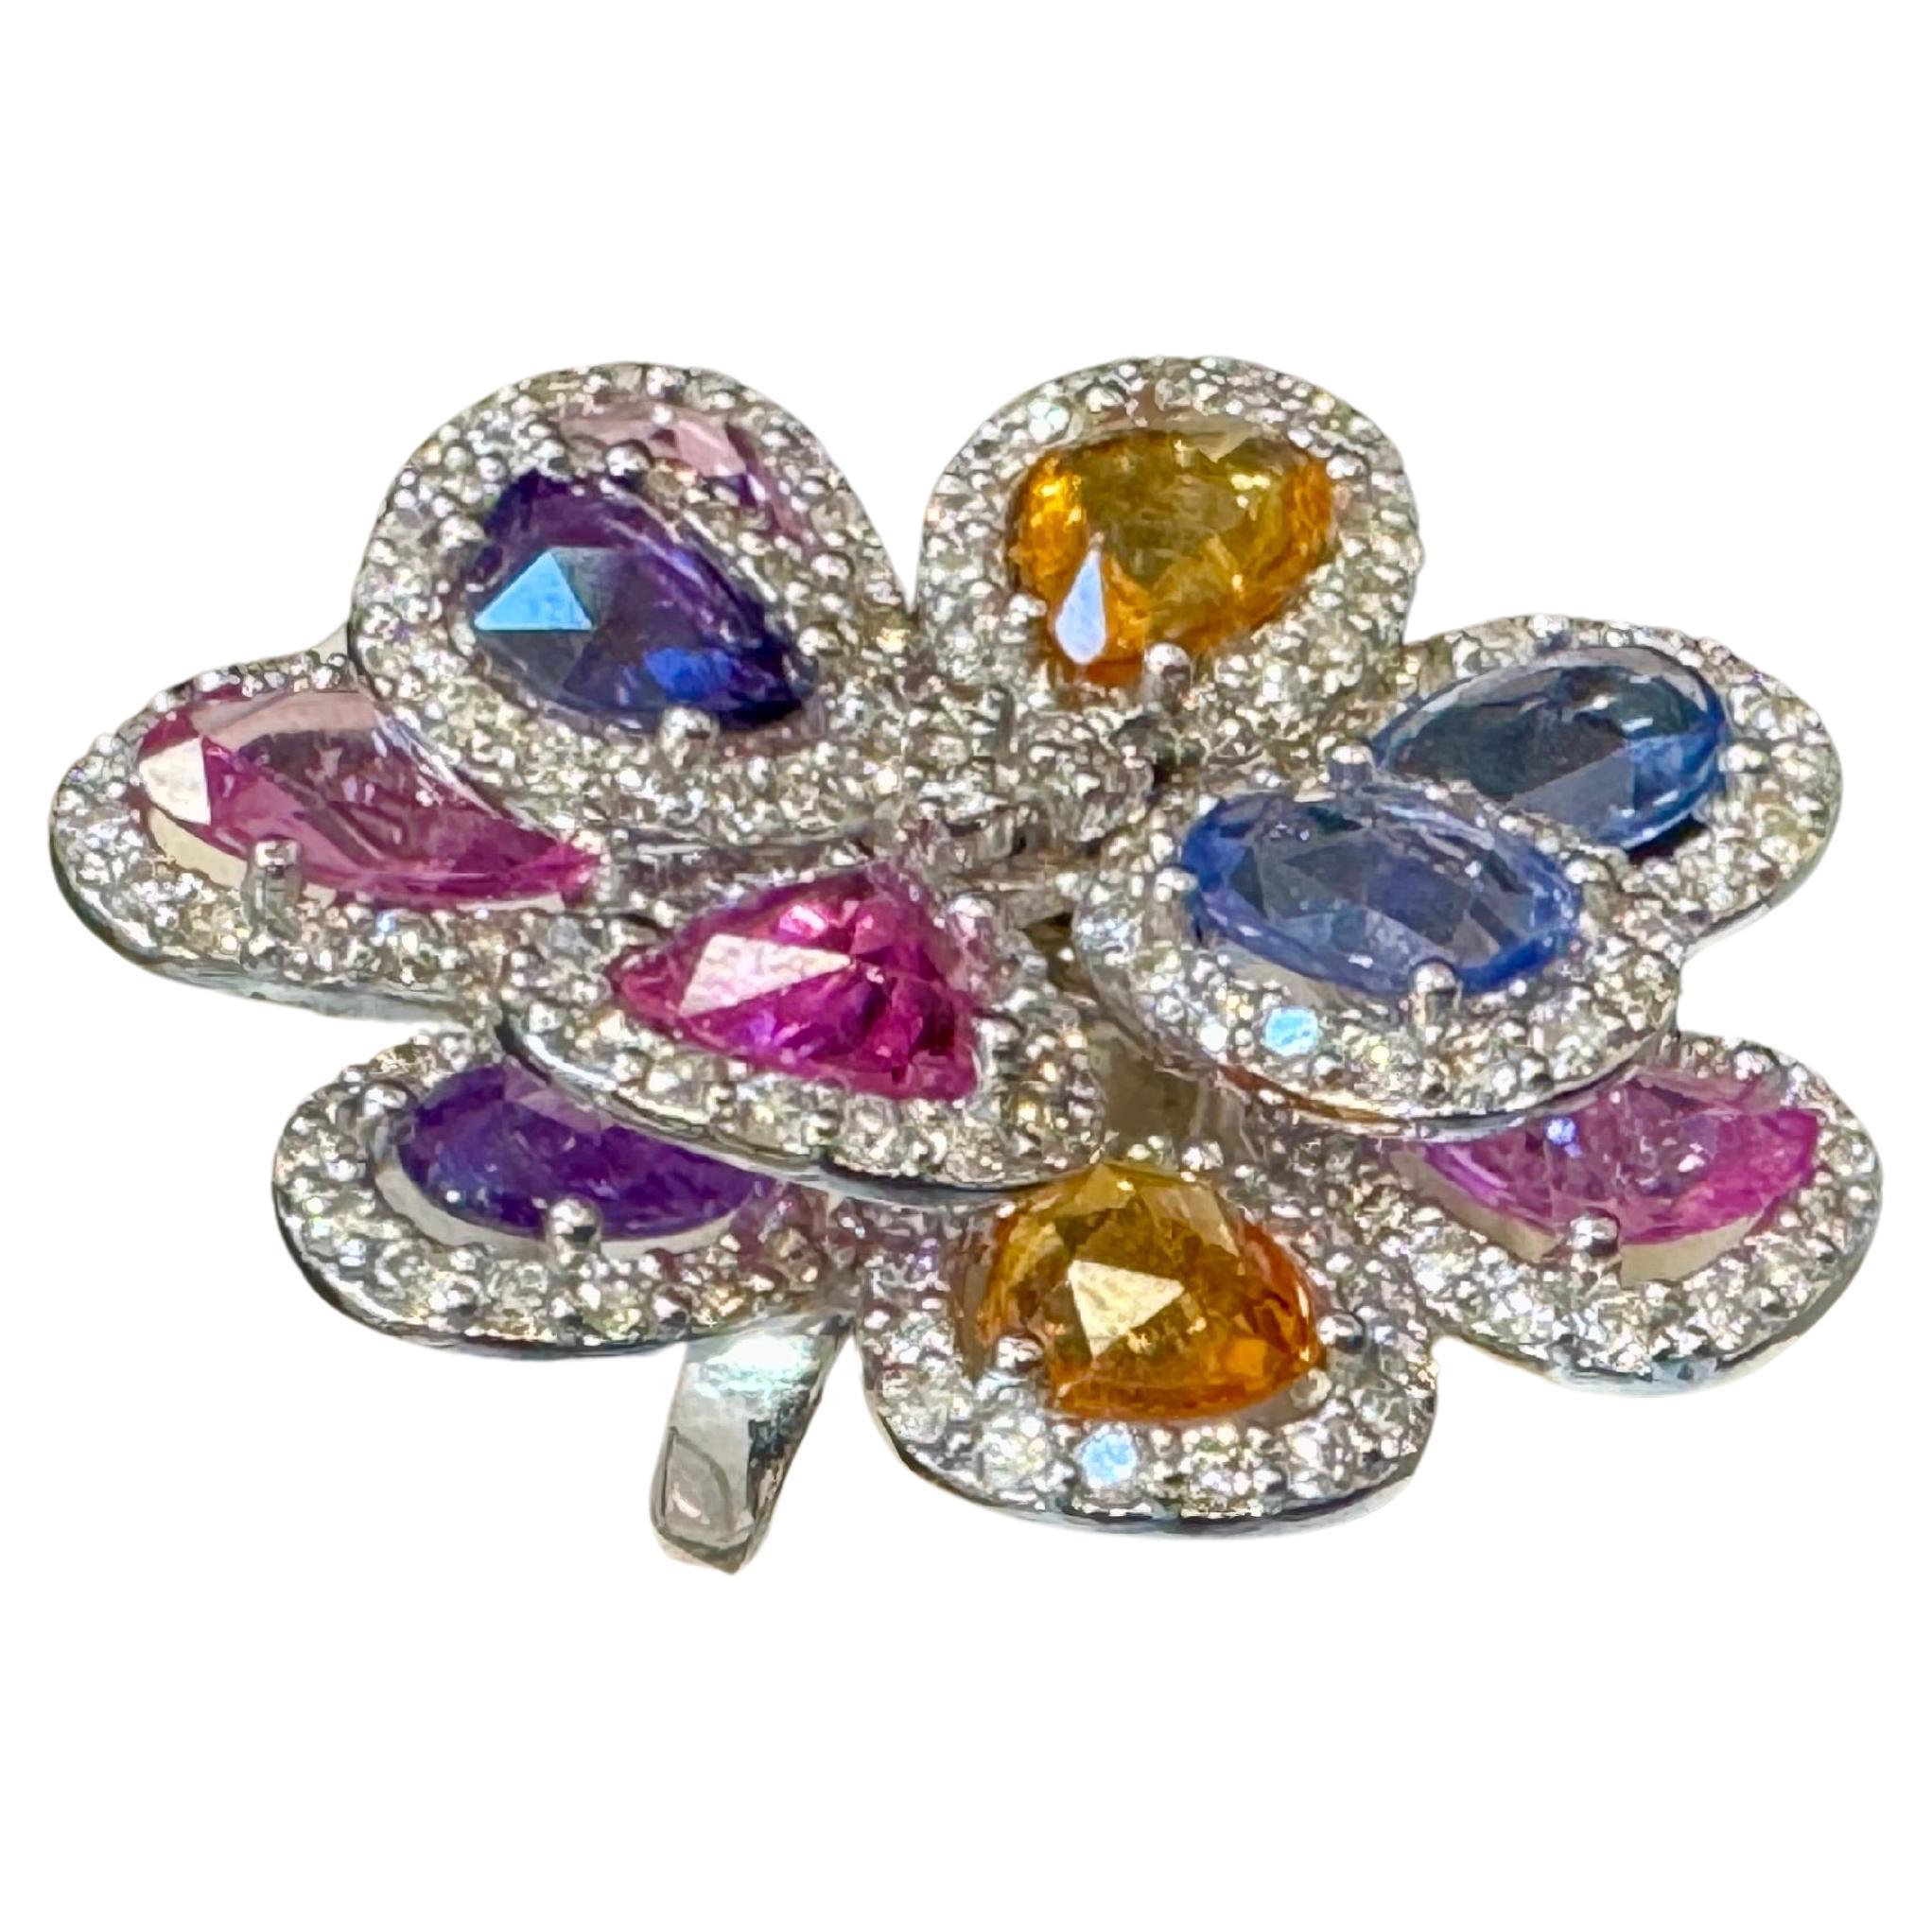 11 Ct Fine Multi Sapphire & 3 Ct Diamond Cocktail Flower Ring in 18 Kt Gold  6.5 For Sale